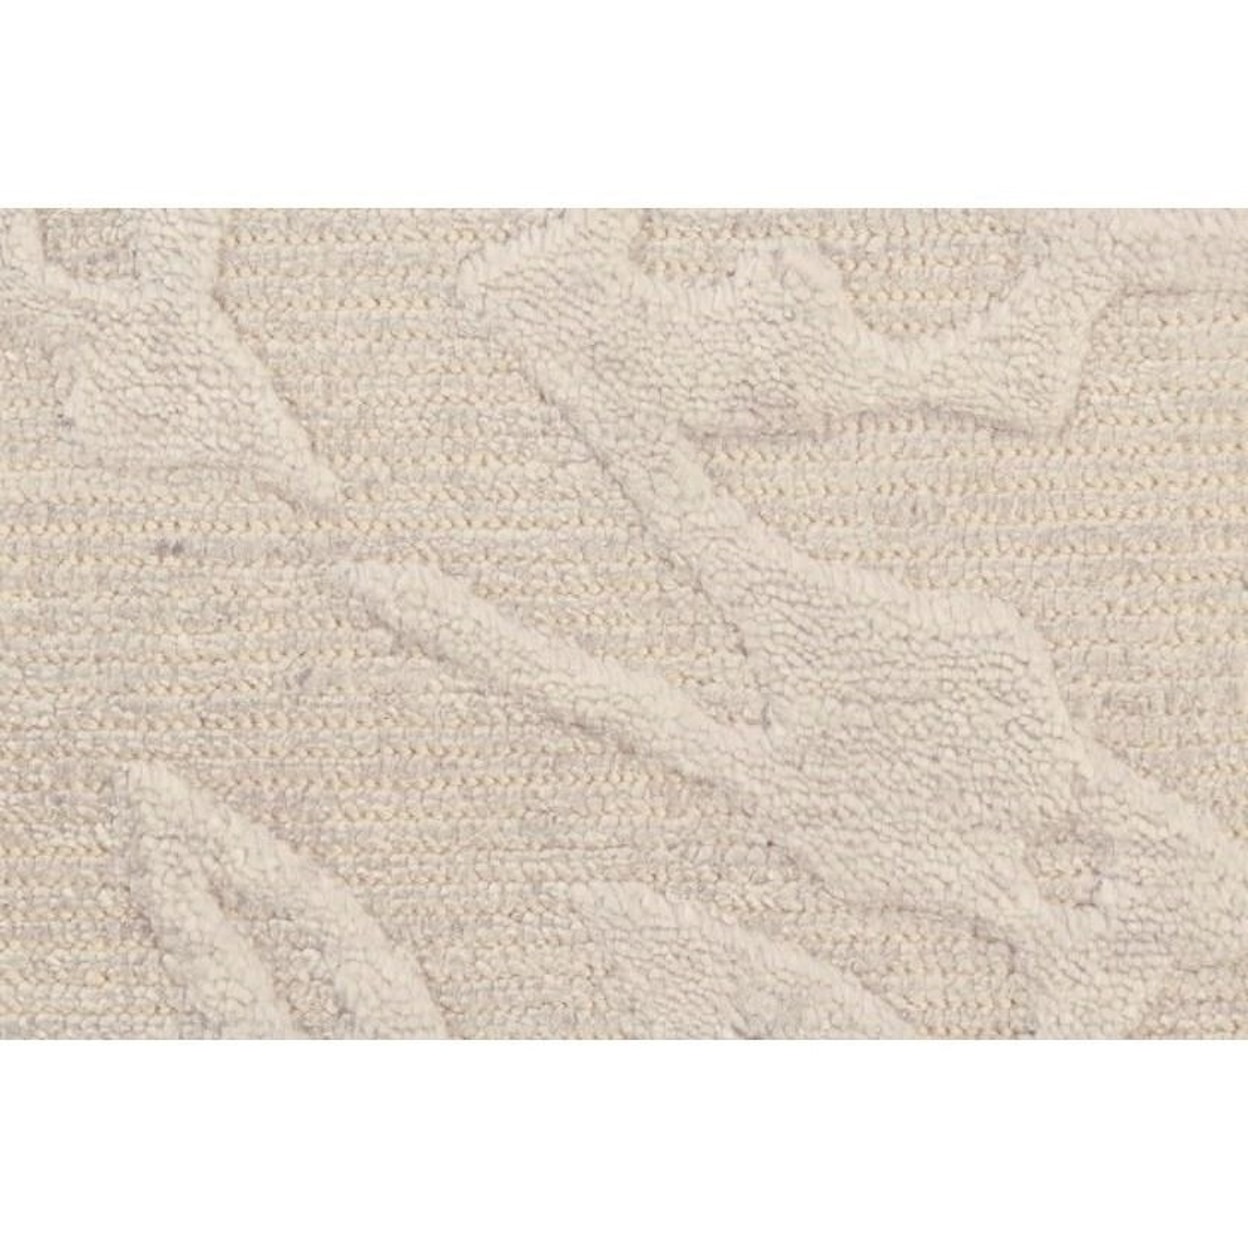 Feizy Rugs Leilani Cashmere 4' x 6' Area Rug